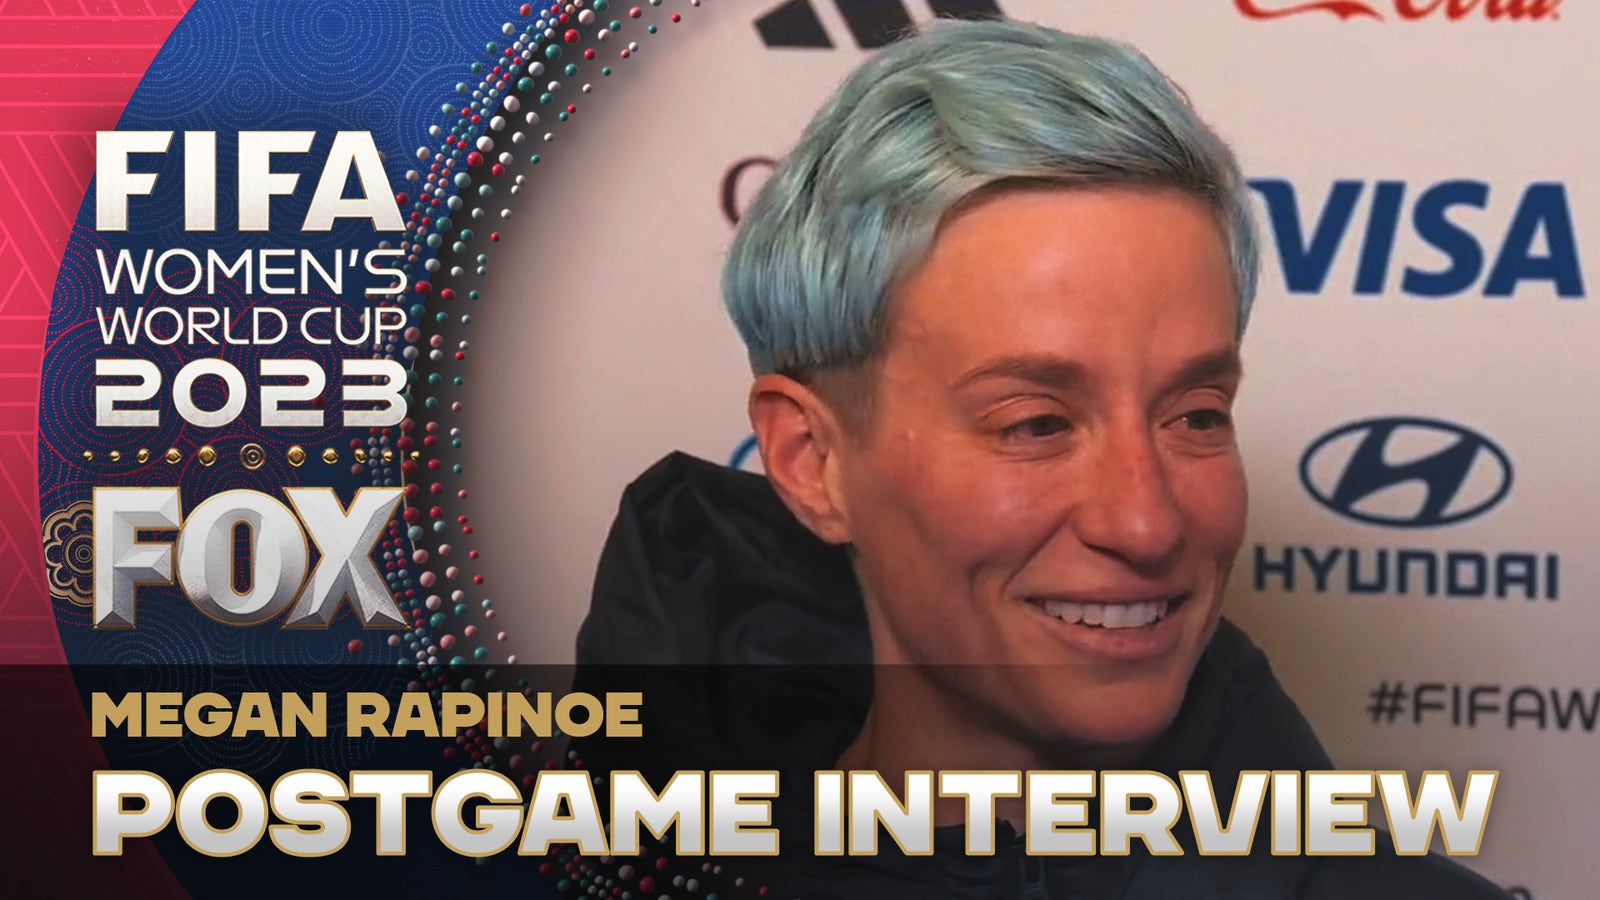 'It's been an honor' - Megan Rapinoe on playing in her final USWNT World Cup game